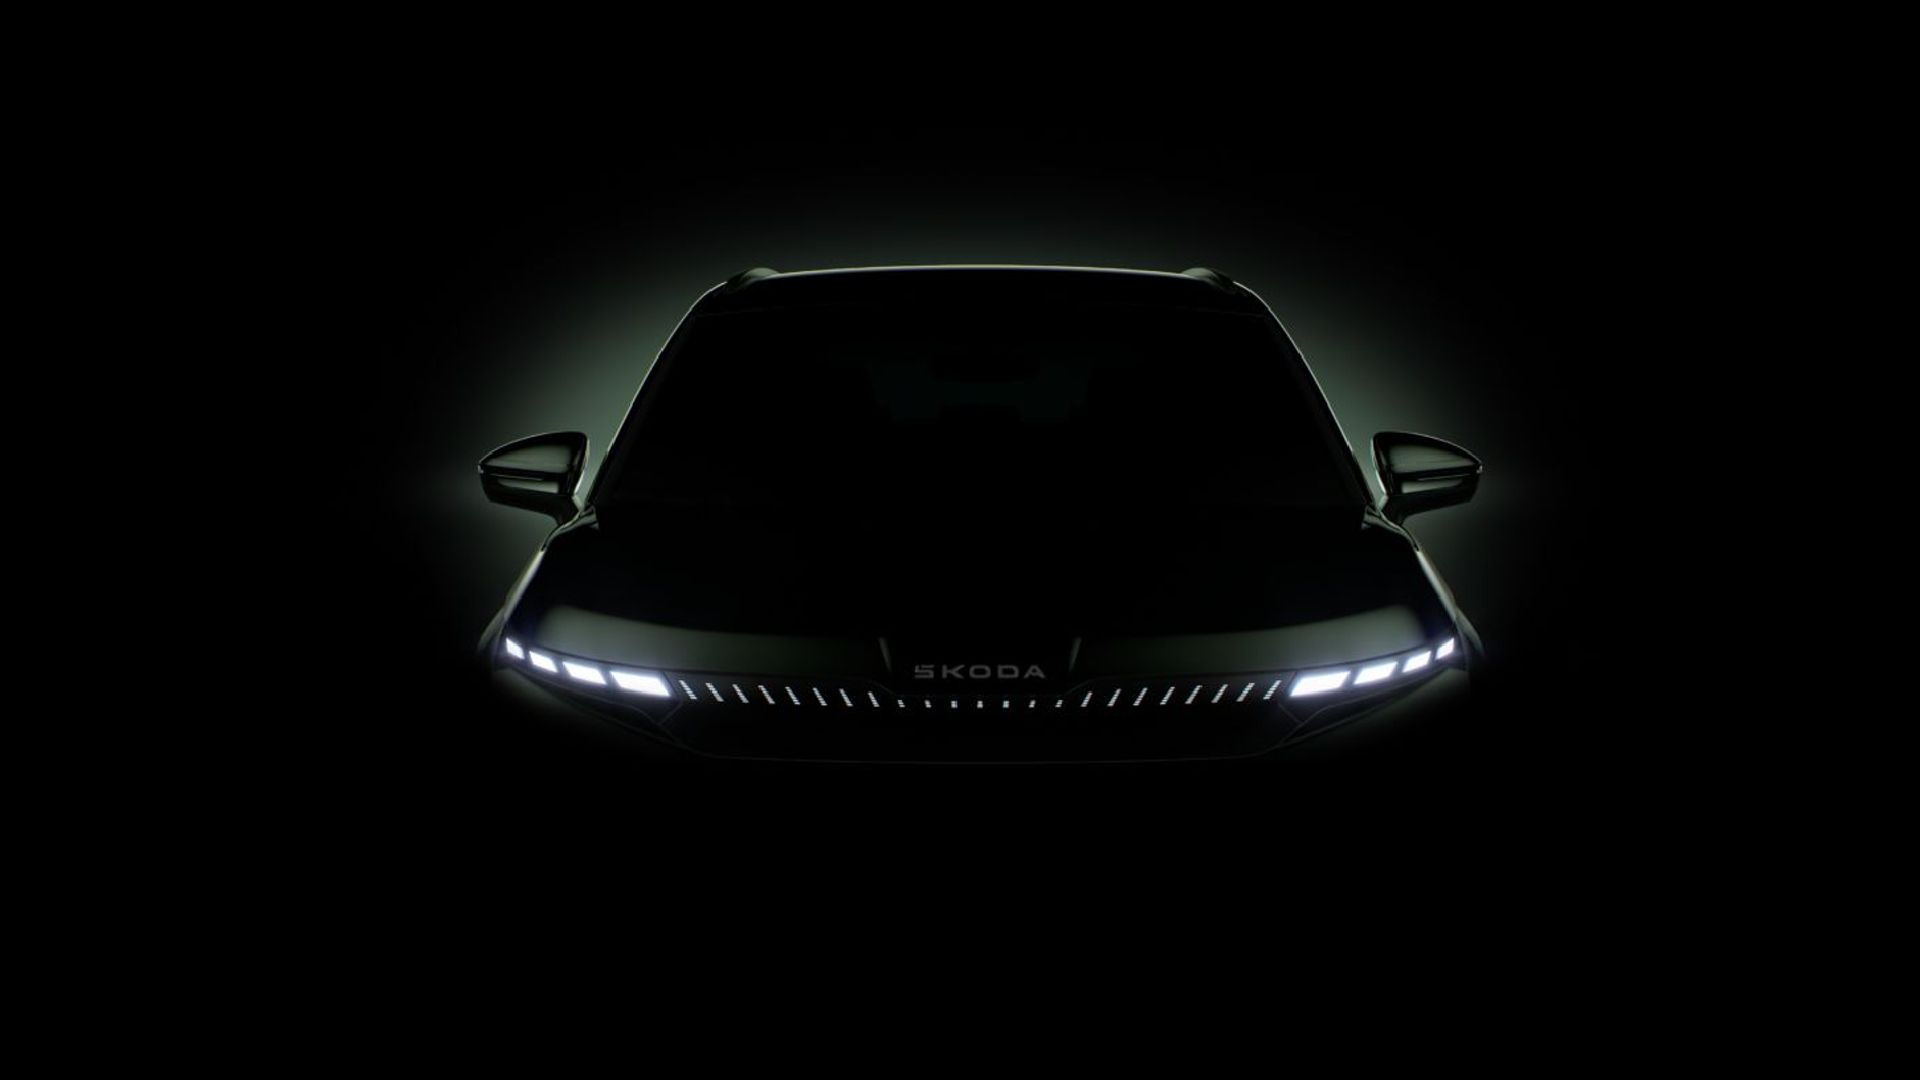 Skoda unveils the first silhouette of the electric SUV Elroq (Source: Skoda)